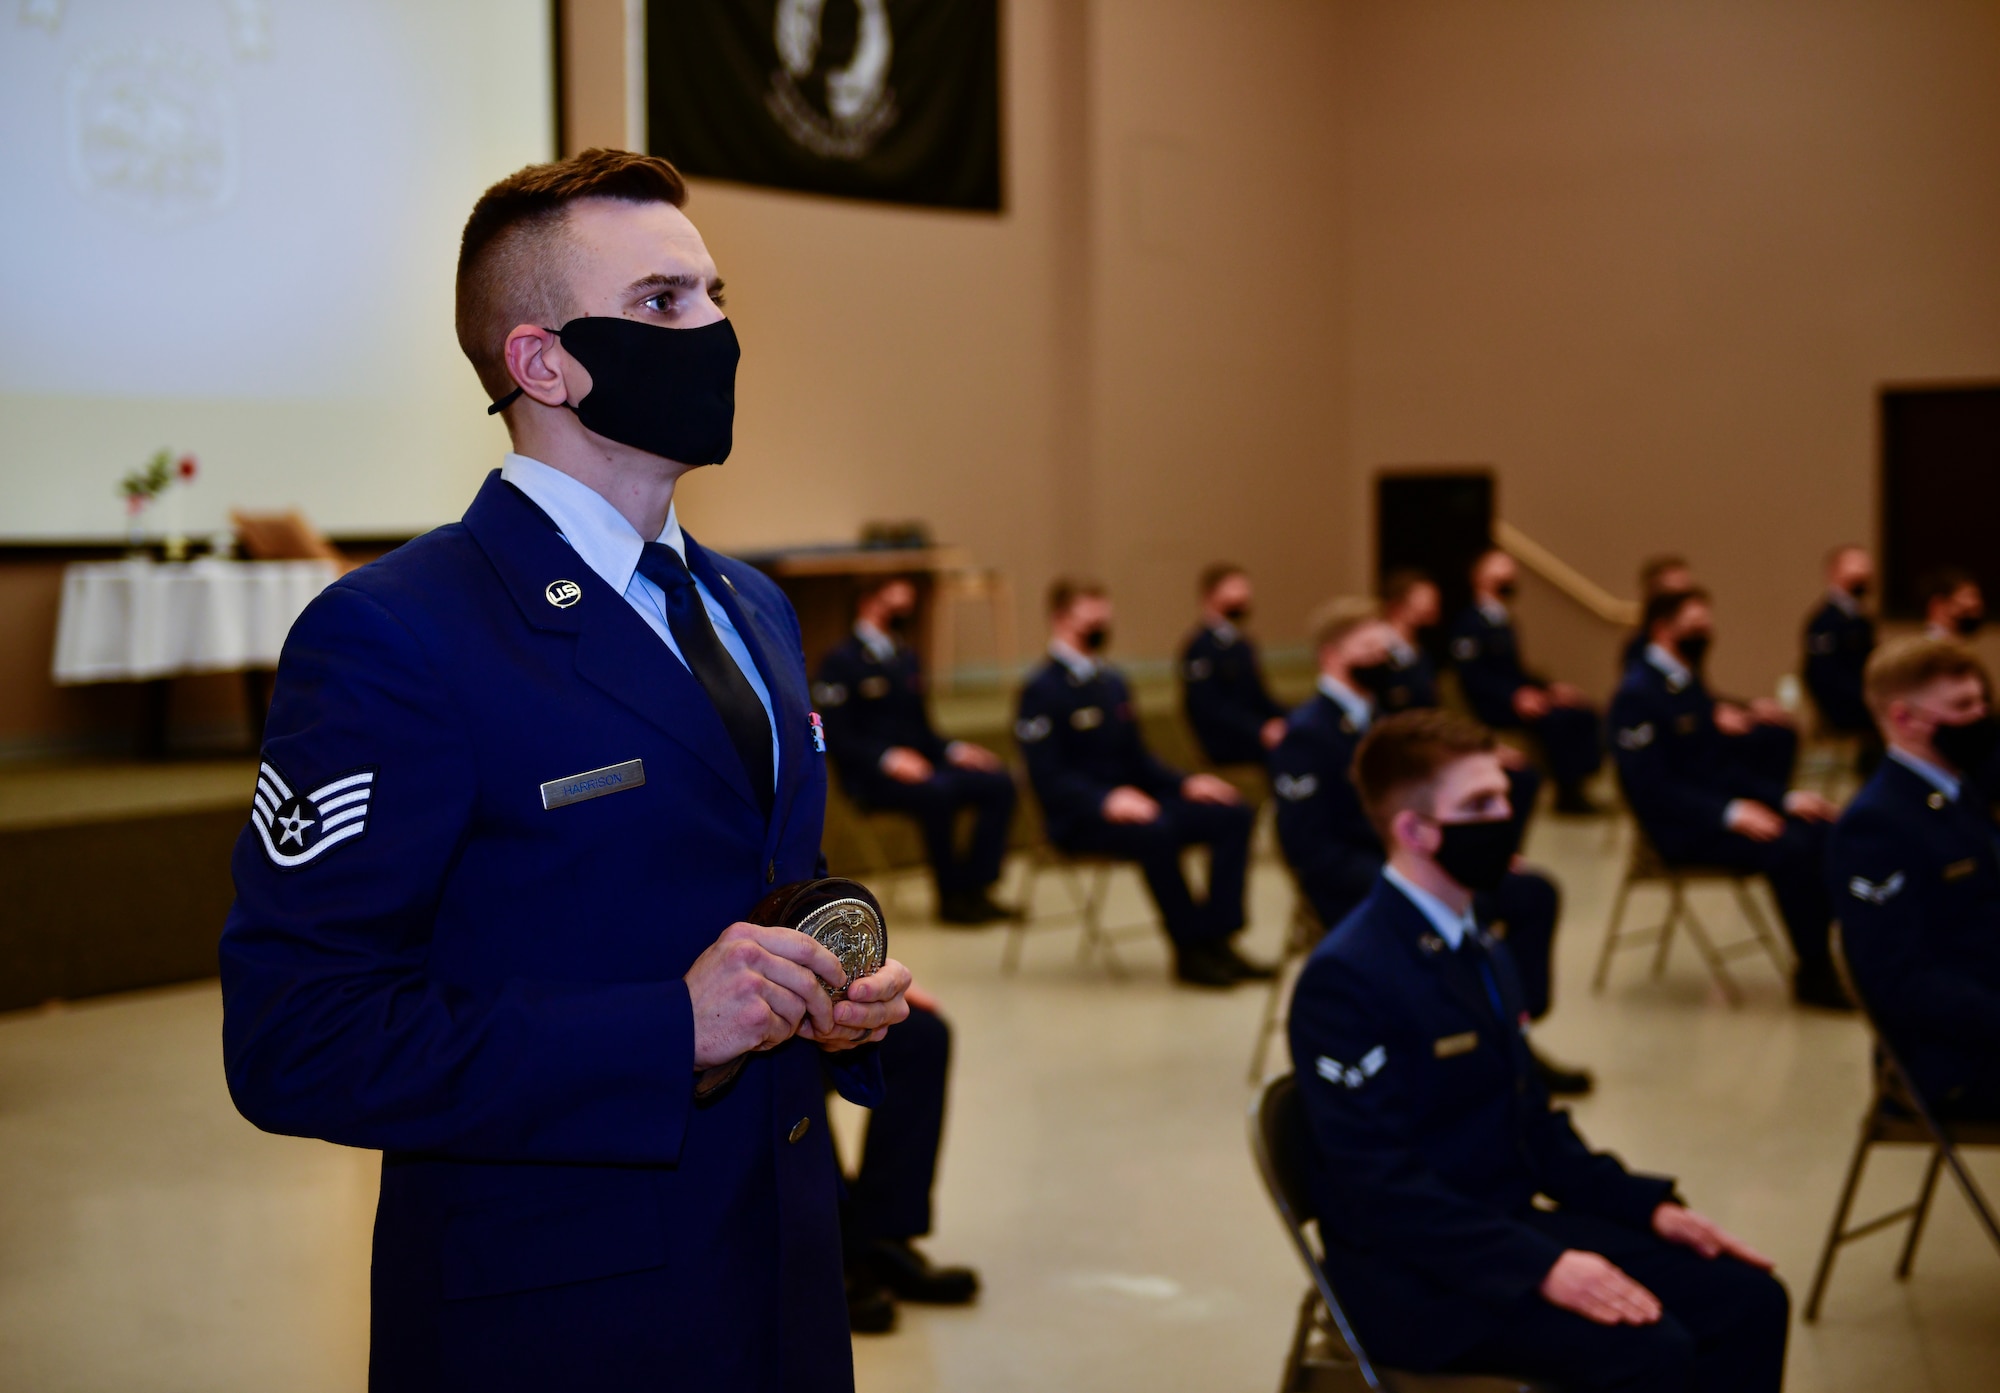 U.S. Air Force Staff Sgt. Dillon Harrison, 66th Training Squadron Survival, Evasion, Resistance and Escape specialist, holds the Fire Belt during a SERE Specialist Apprentice Course graduation ceremony at Fairchild Air Force, Washington, January 8, 2021. The belt is awarded to the student with the fastest fire craft time during training, and is a tribute to fallen SERE specialist, Master Sgt. Christopher Sheaffer. (U.S. Air Force photo by Senior Airman Ryan Gomez)